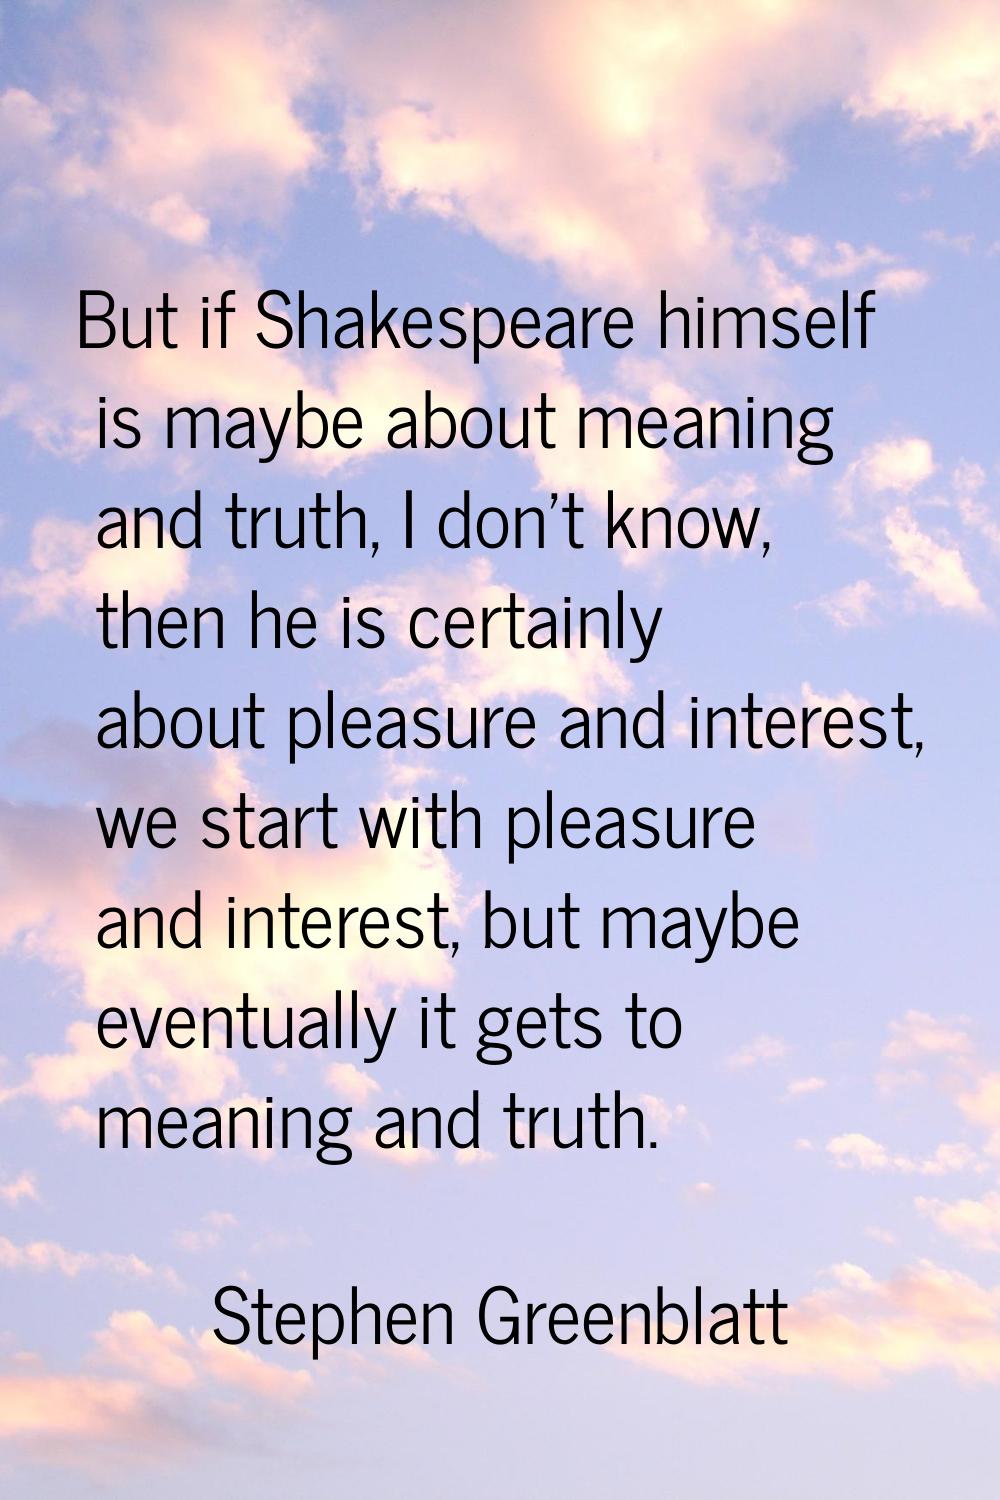 But if Shakespeare himself is maybe about meaning and truth, I don't know, then he is certainly abo